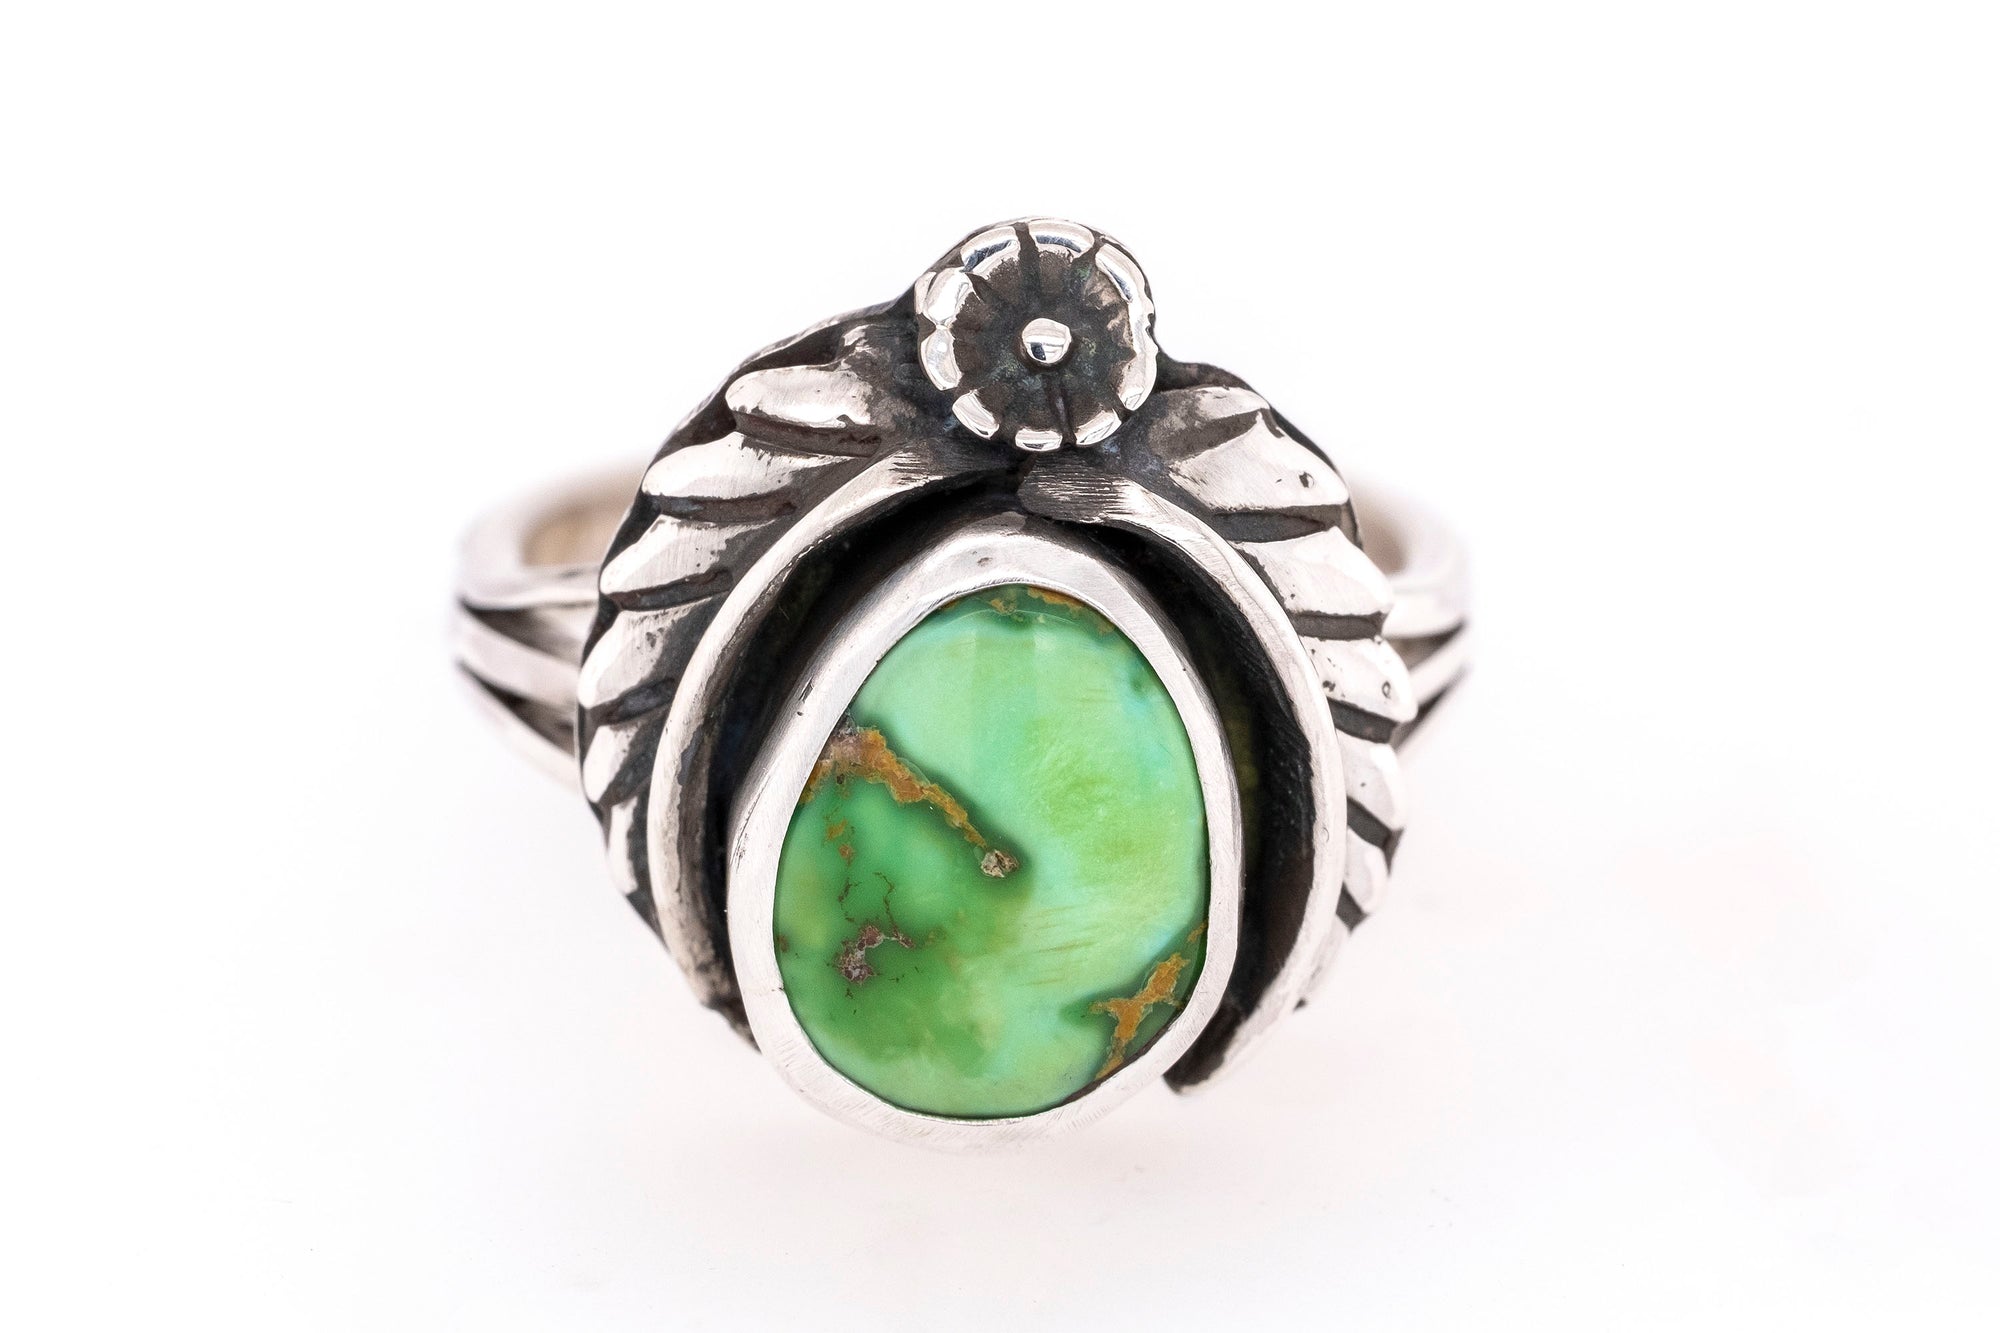 Gary Glandon Flower and Leaf Sonoran Turquoise Ring - Side